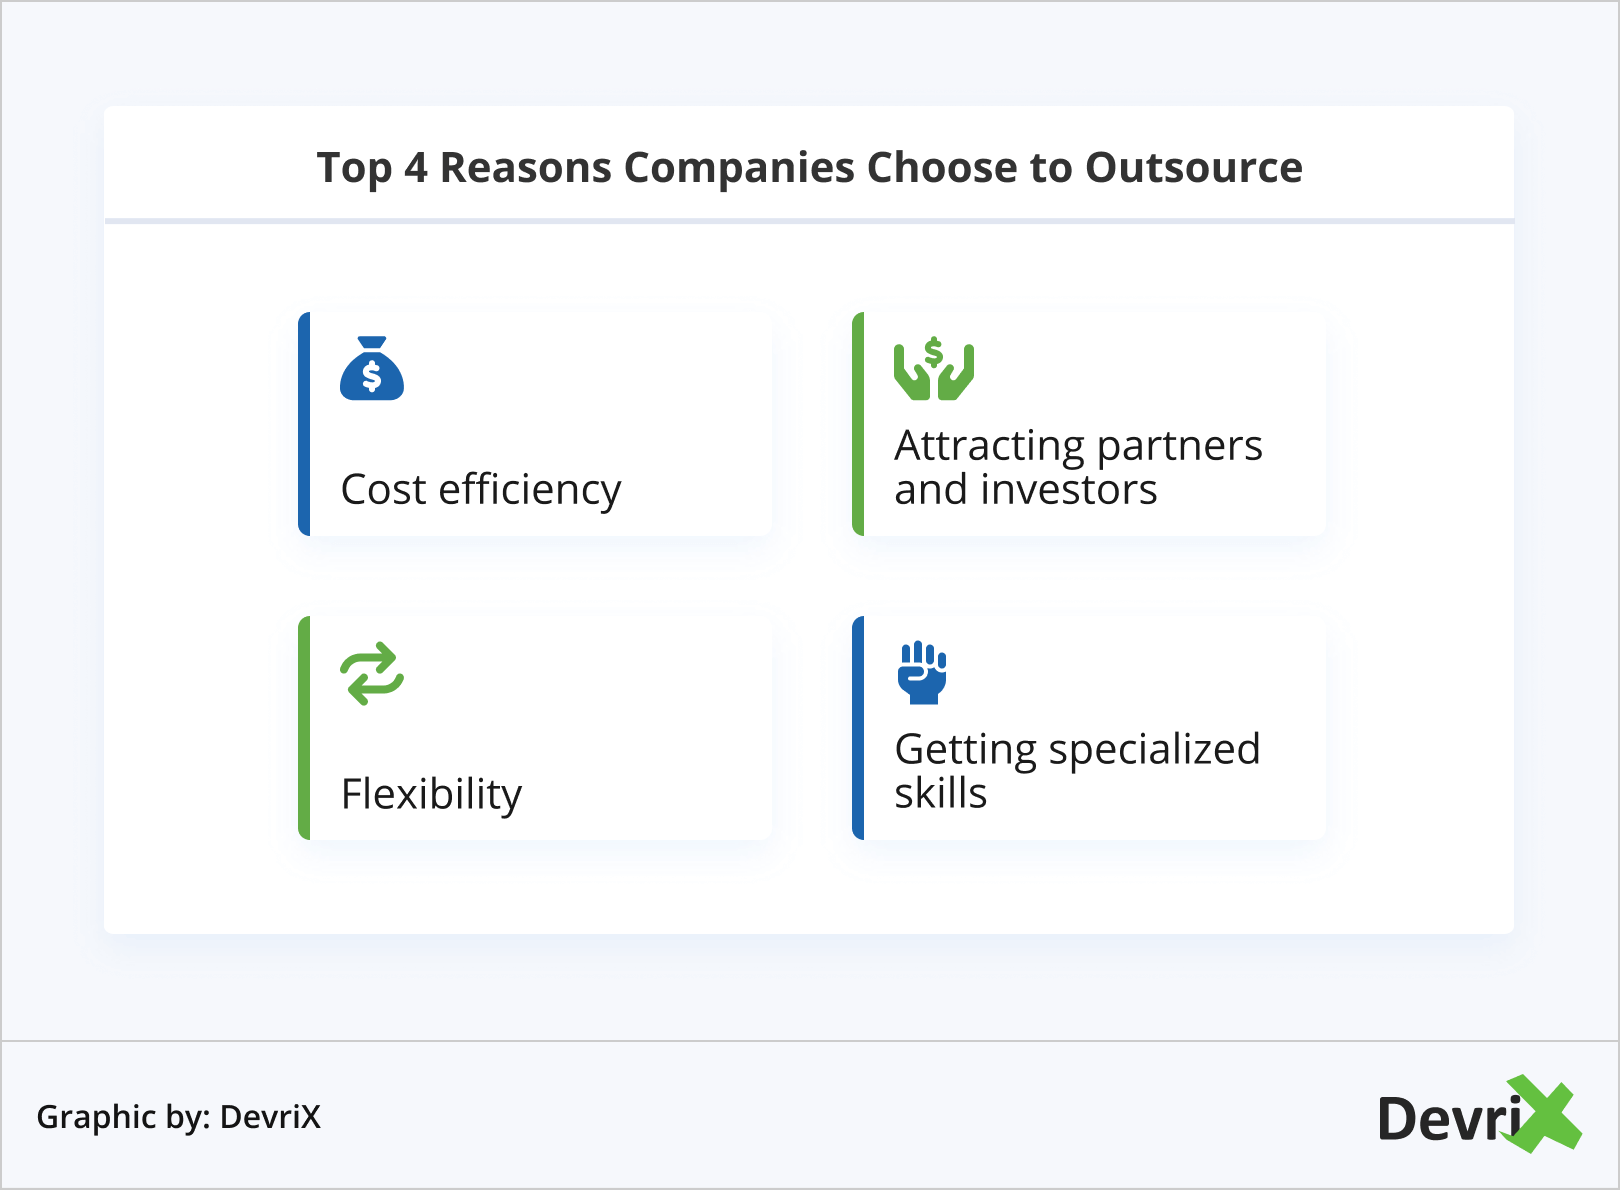 Top 4 Reasons Companies Choose to Outsource